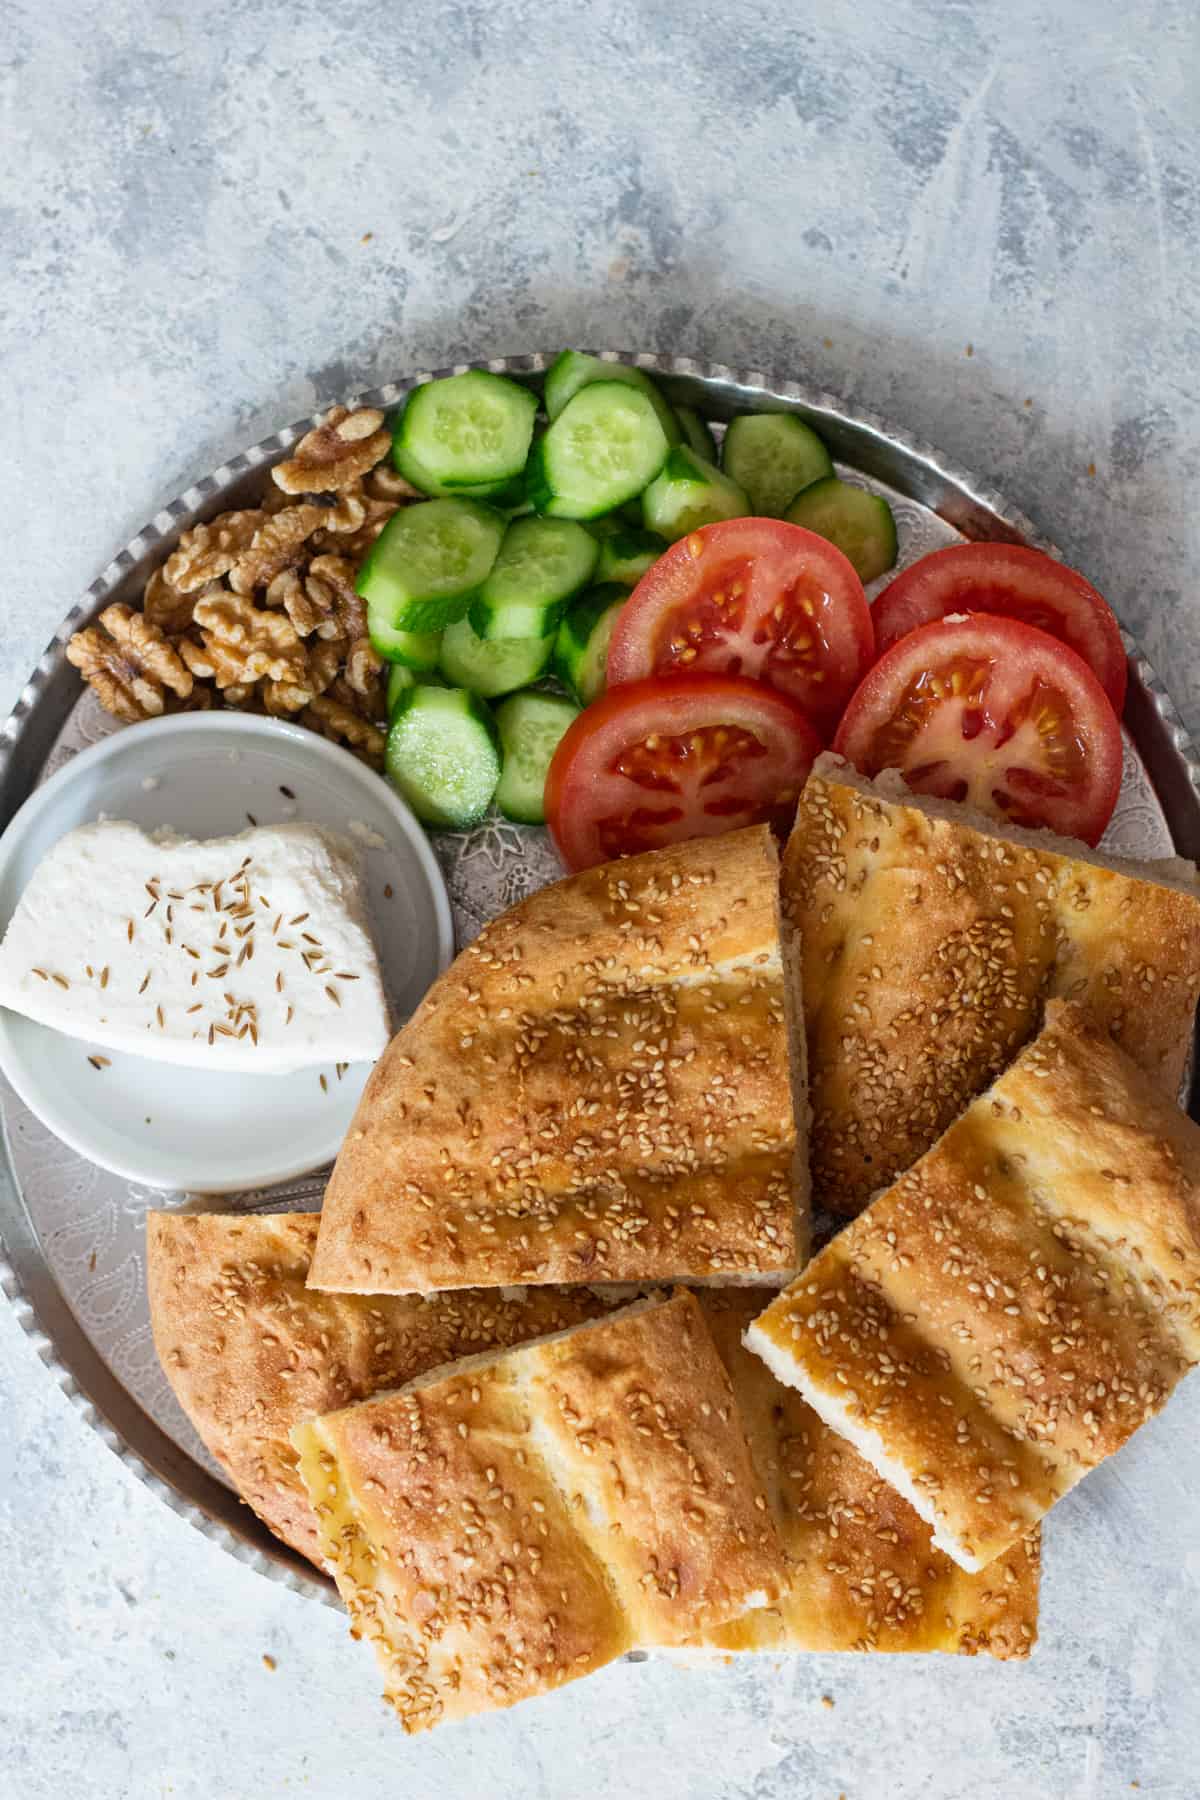 Nan barbari is a classic Persian bread that’s easy to make. With a nice crust and soft inside, this recipe results in a tasty homemade bread suitable for breakfast, lunch or dinner!